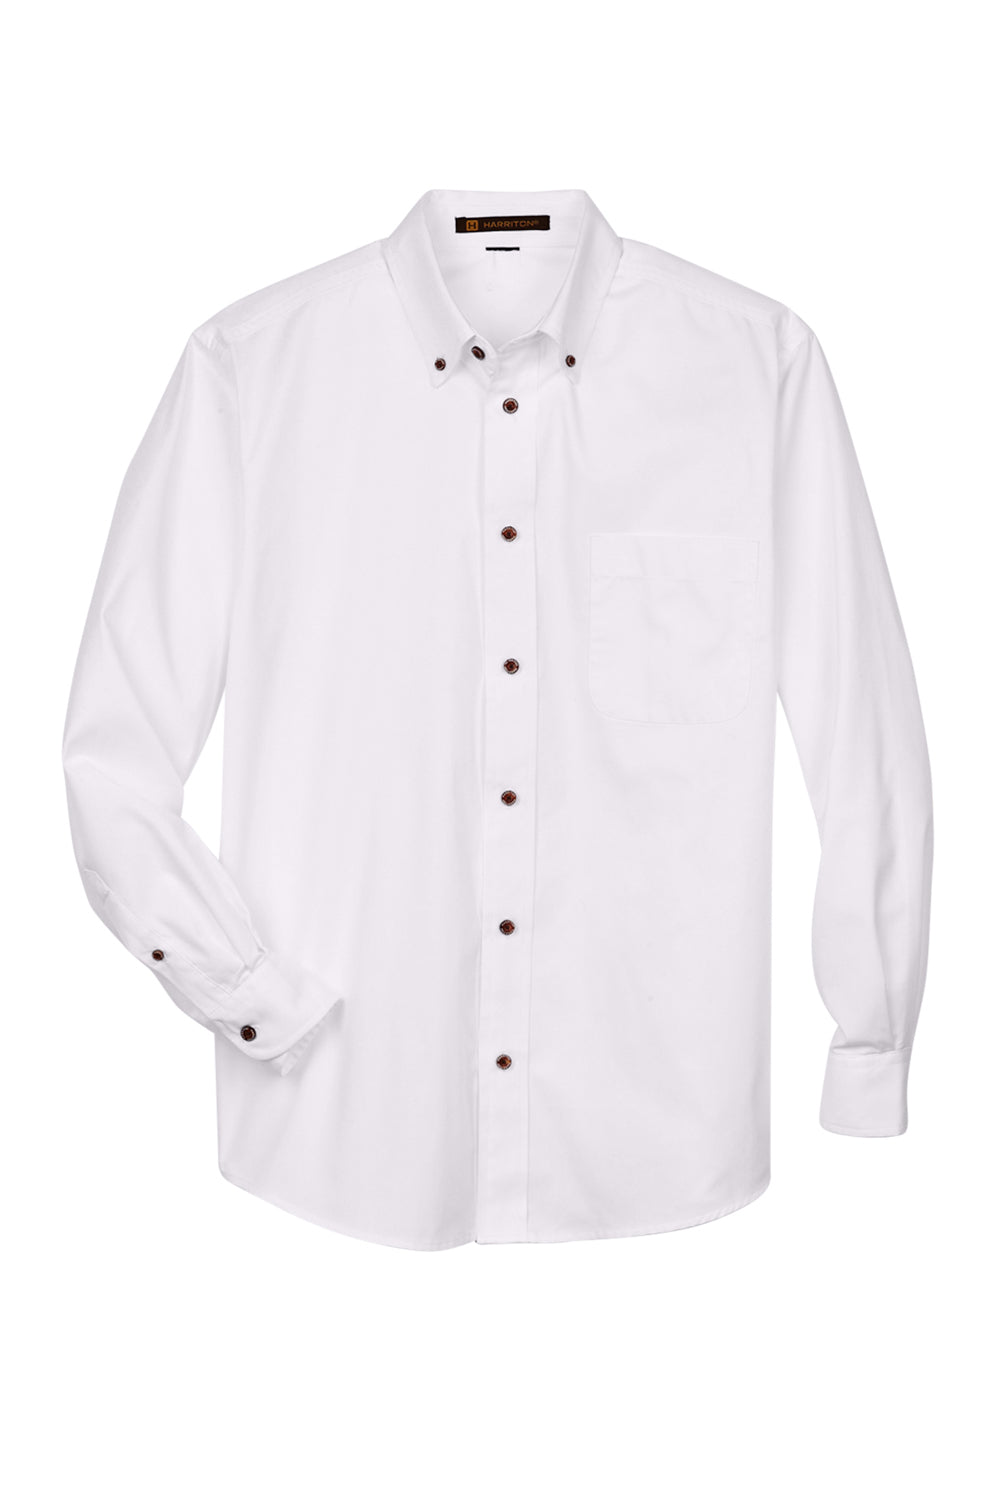 Harriton M500/M500T Wrinkle Resistant Long Sleeve Button Down Shirt w/ Pocket White Flat Front